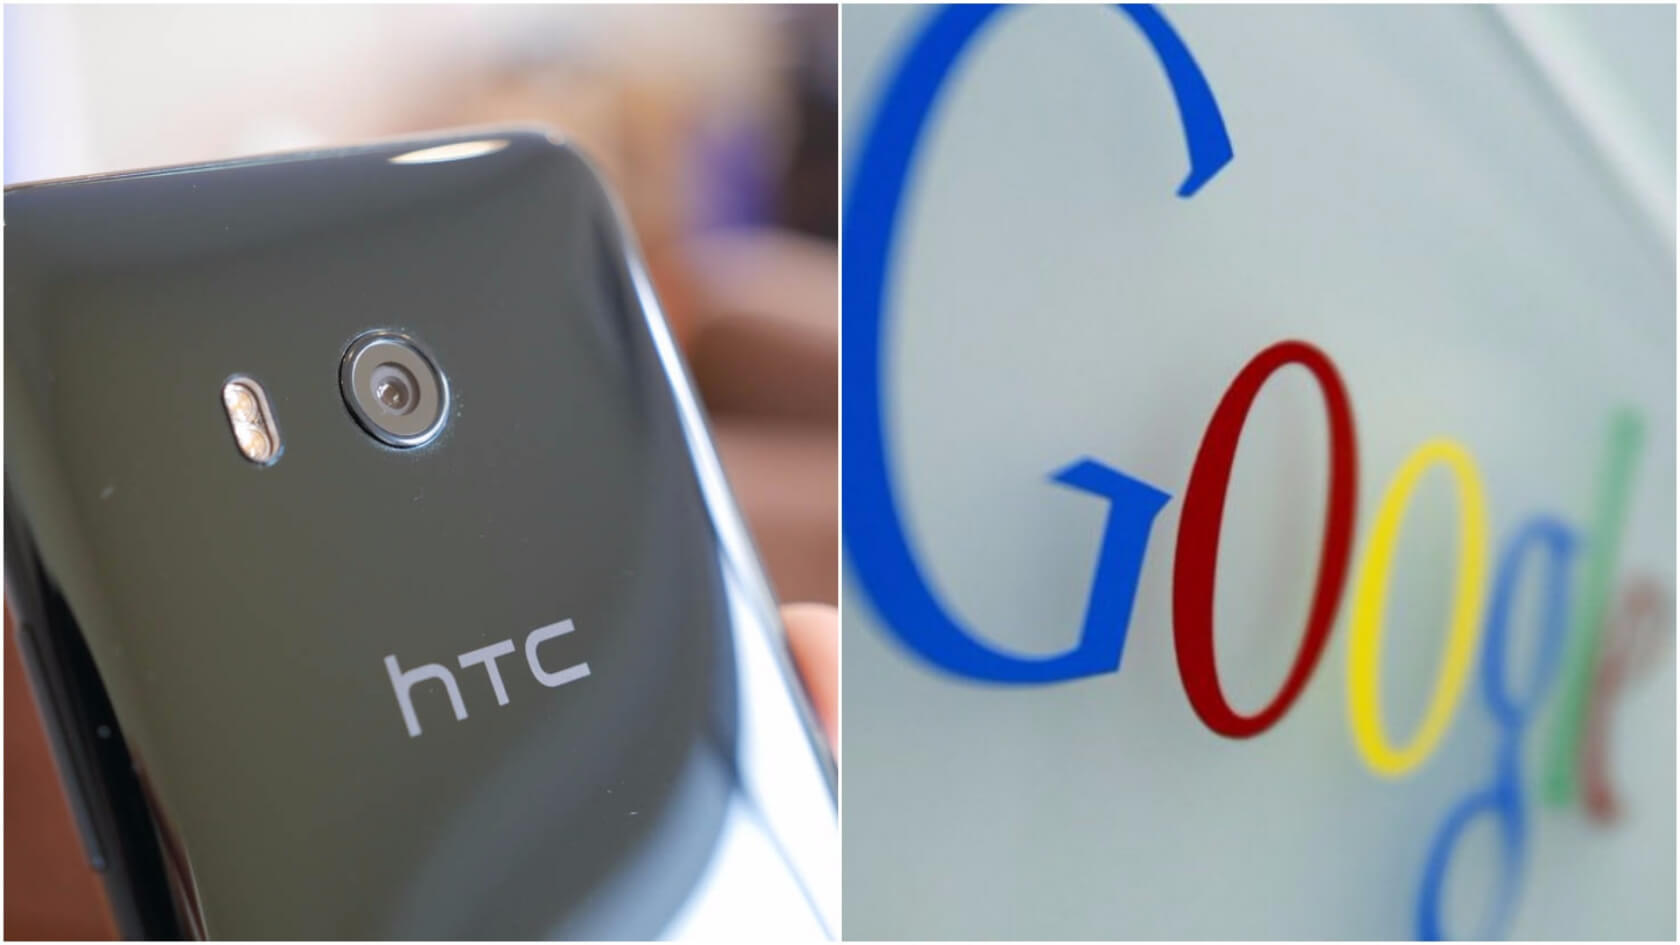 Google is reportedly about to buy HTC's mobile business